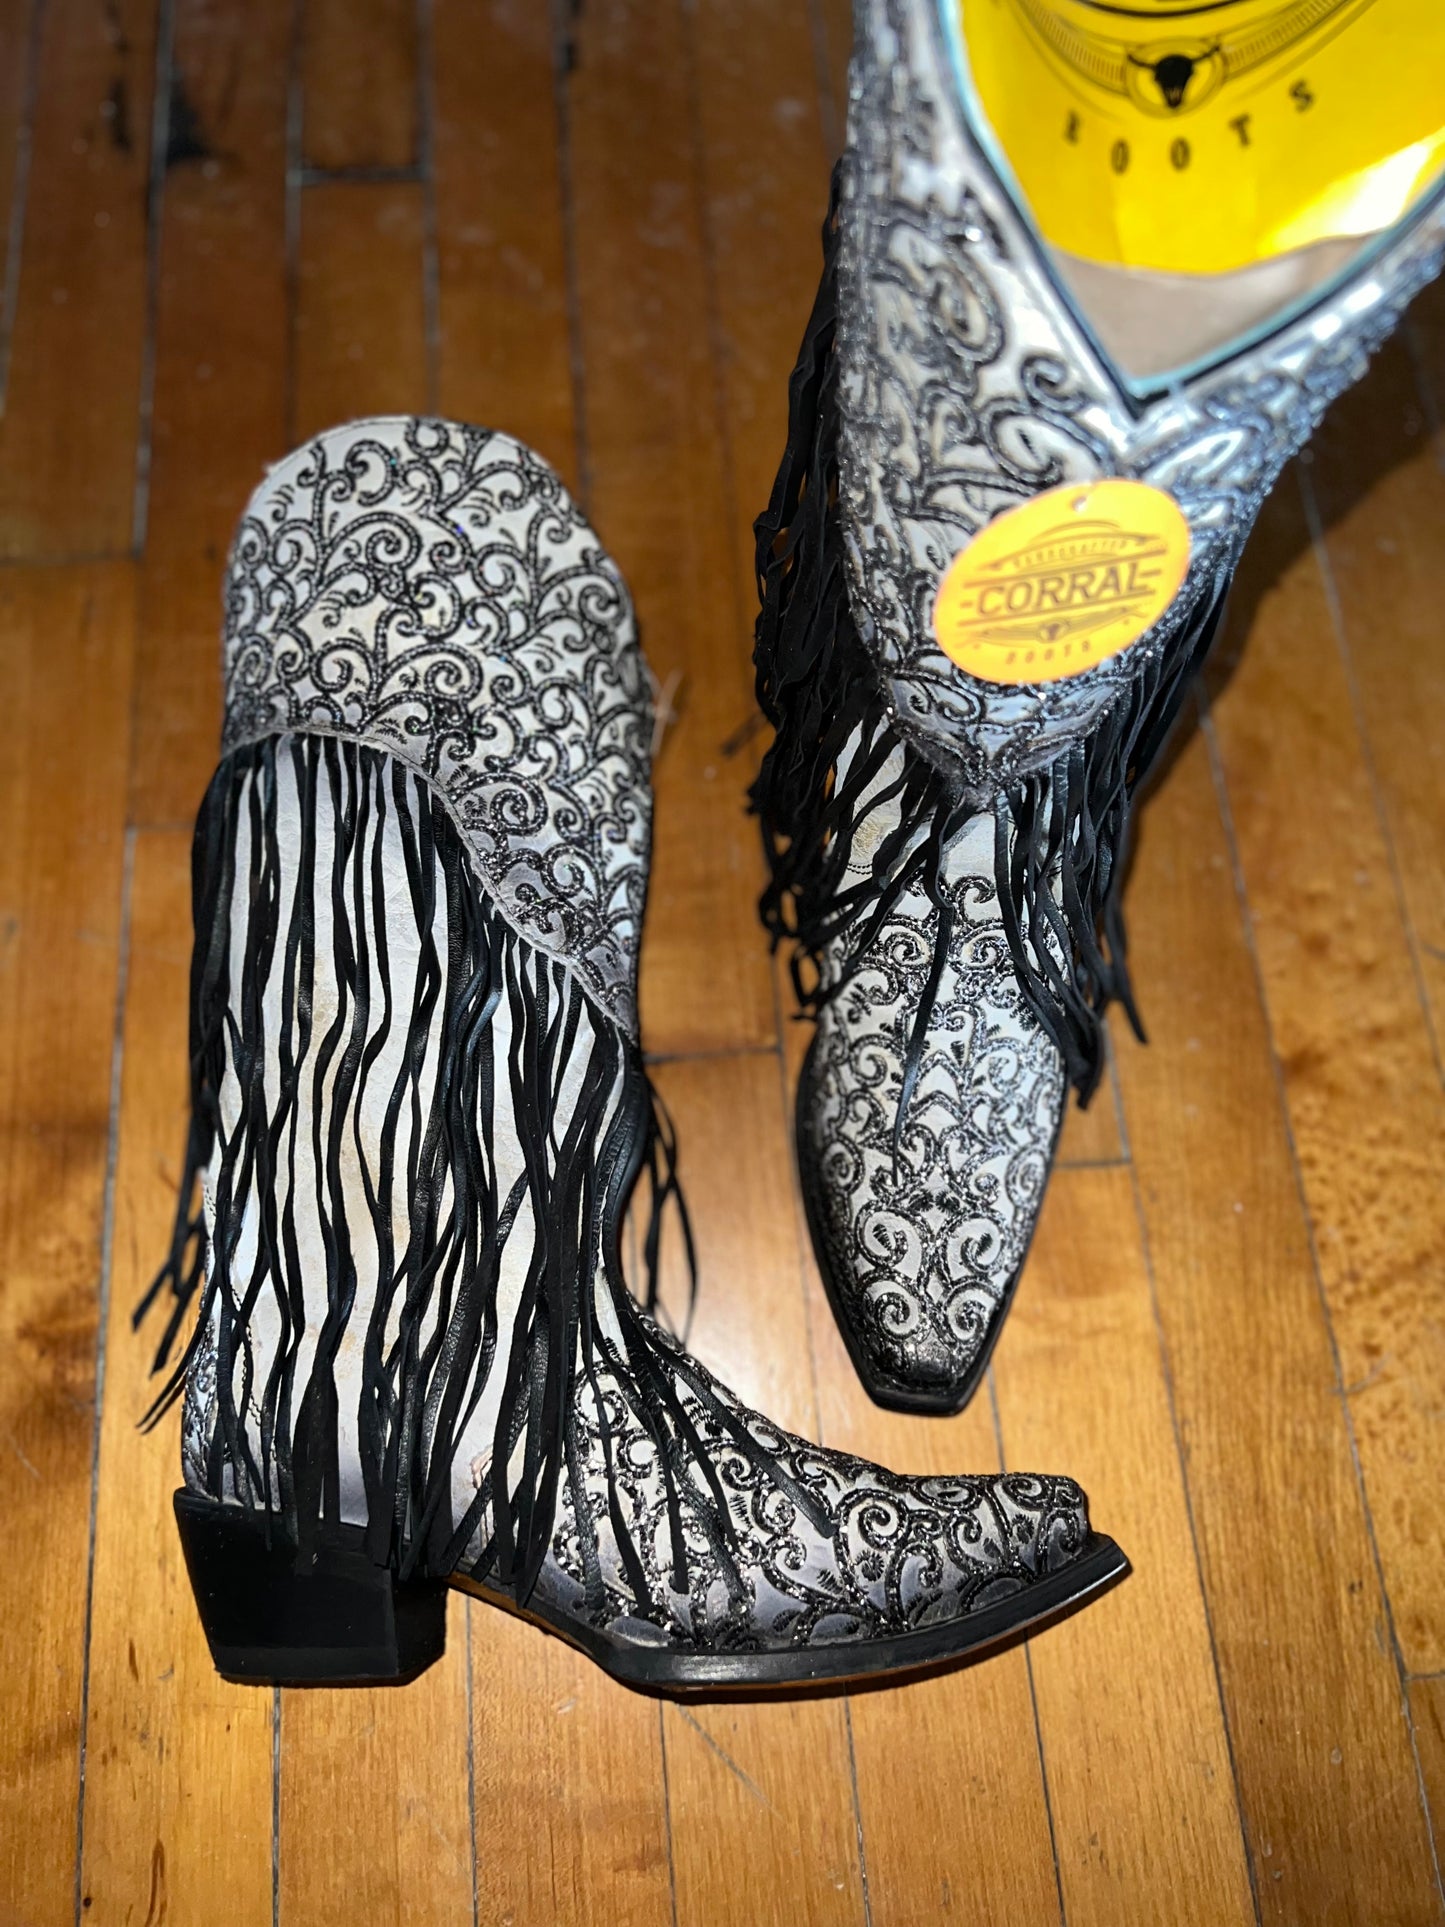 The Fancy Corral Boots